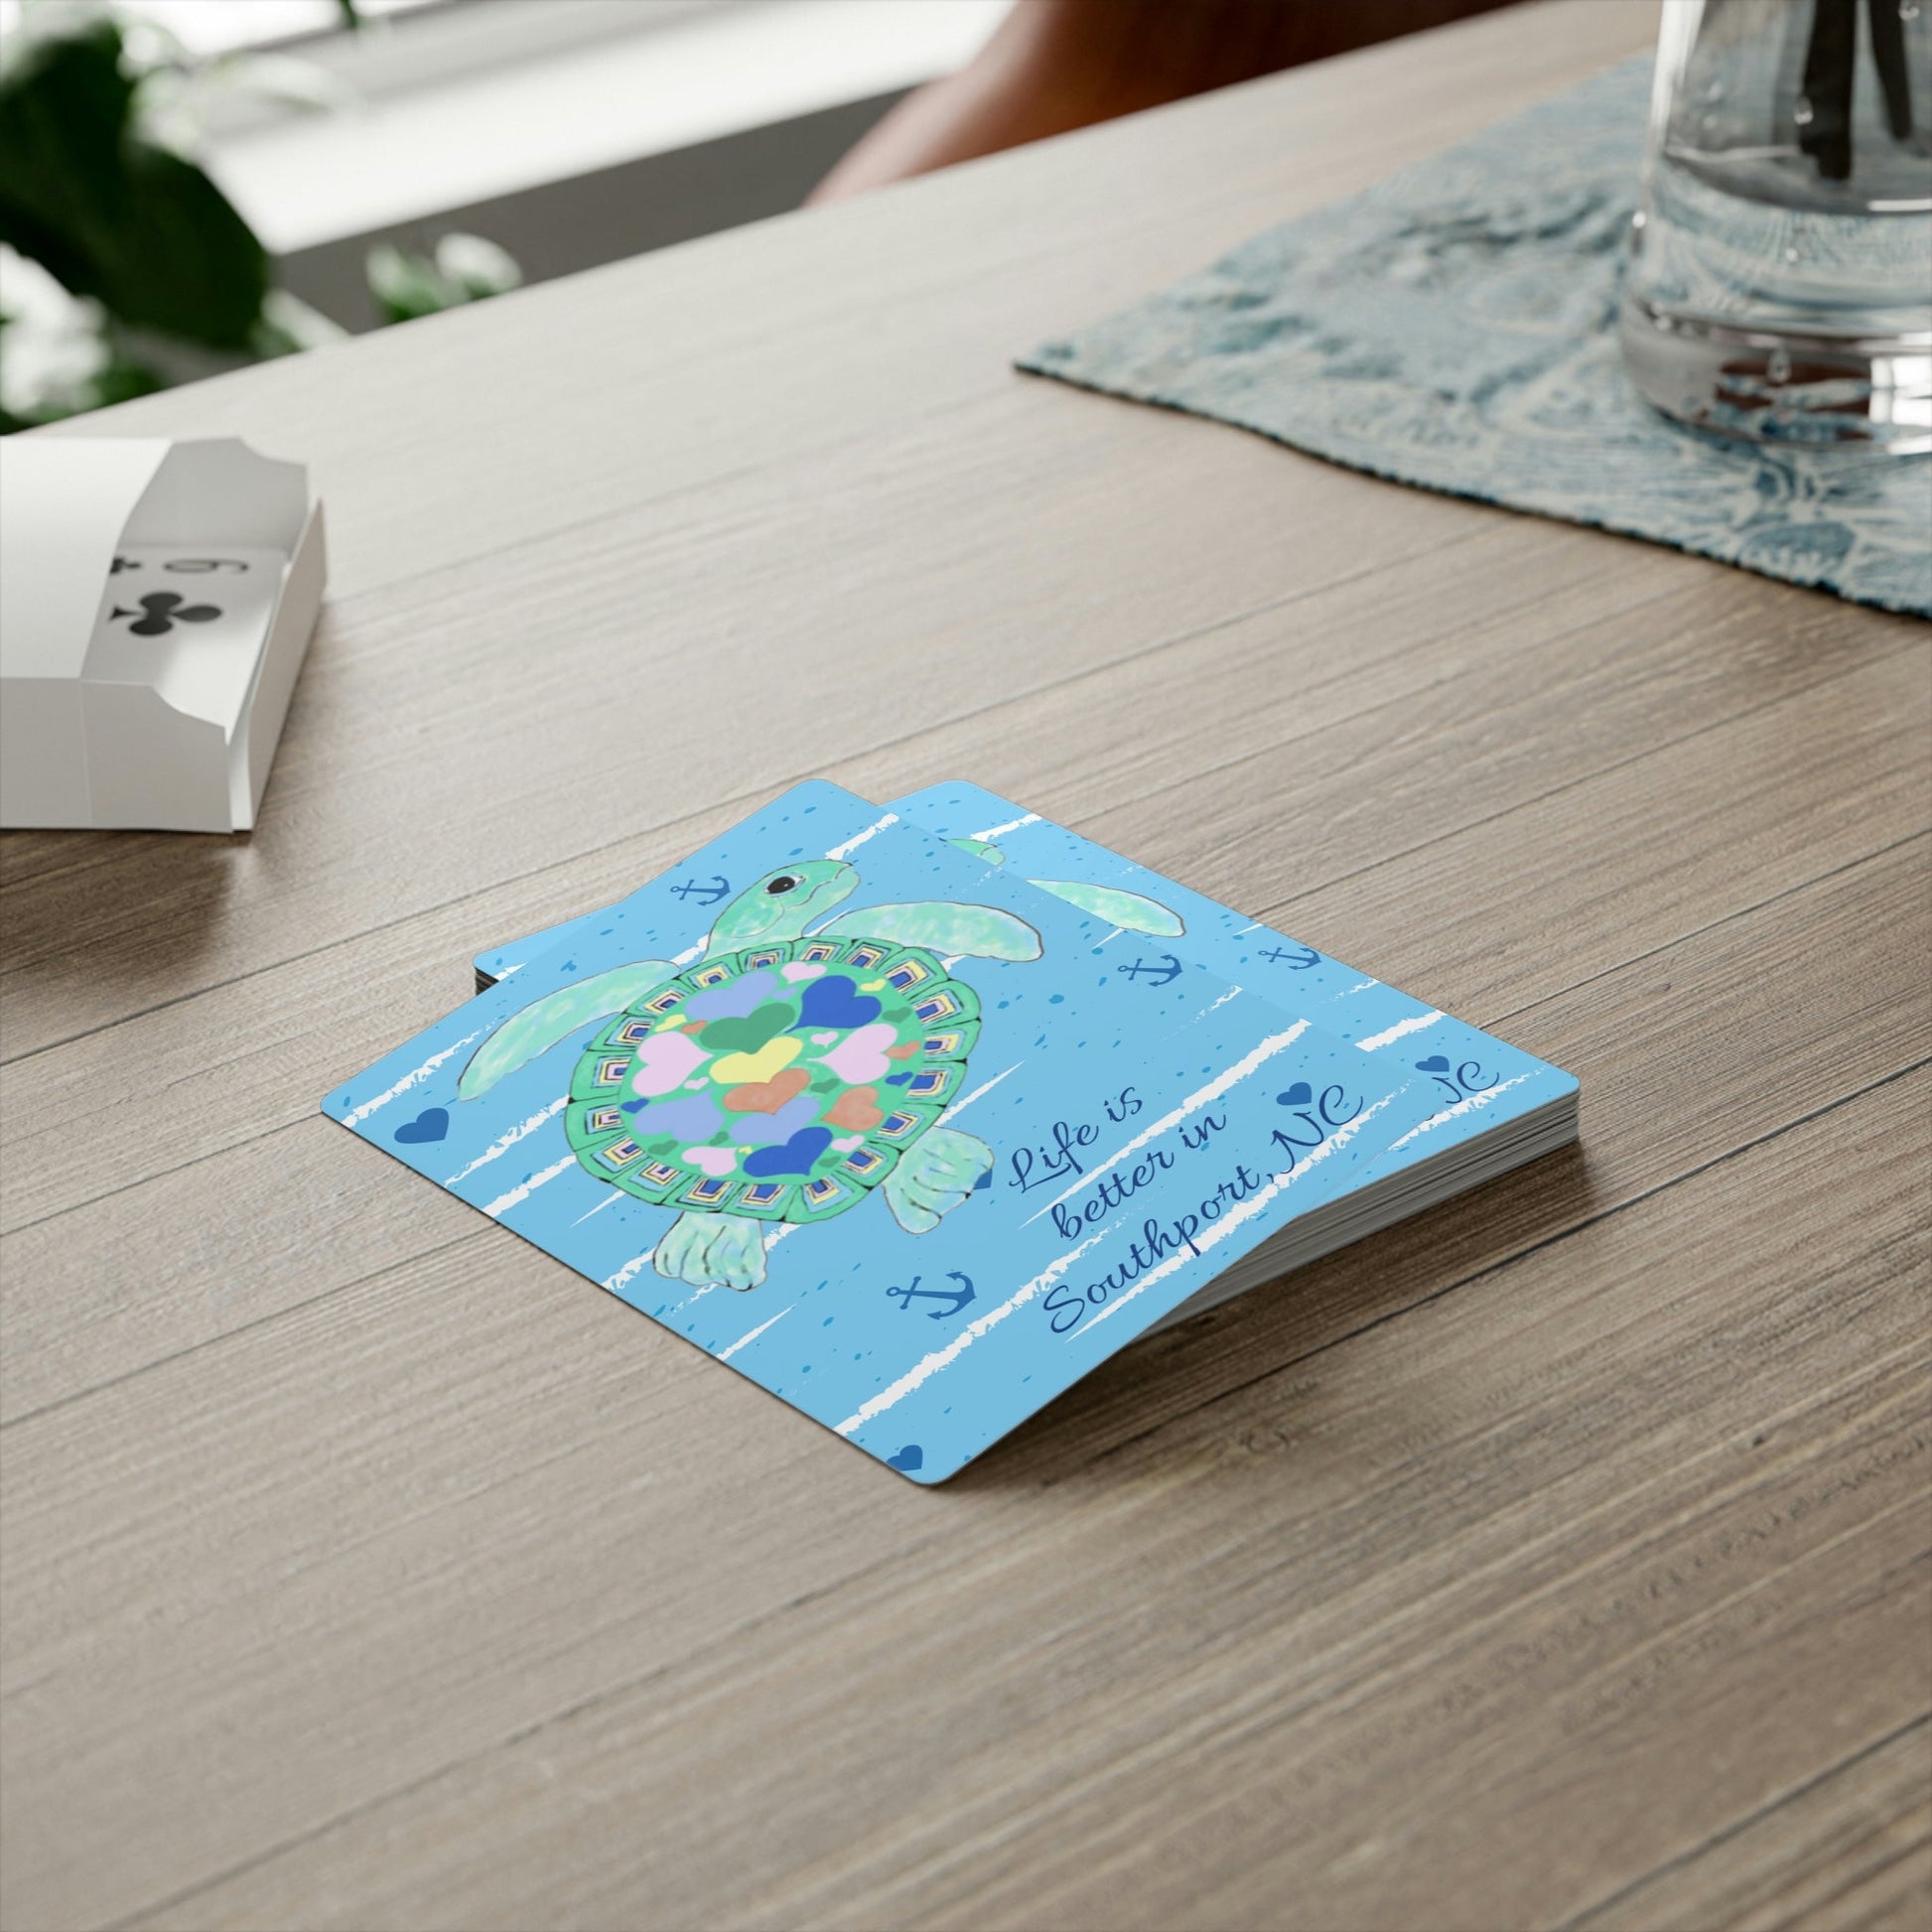 Love Turtle Southport Playing Cards - Blue Cava